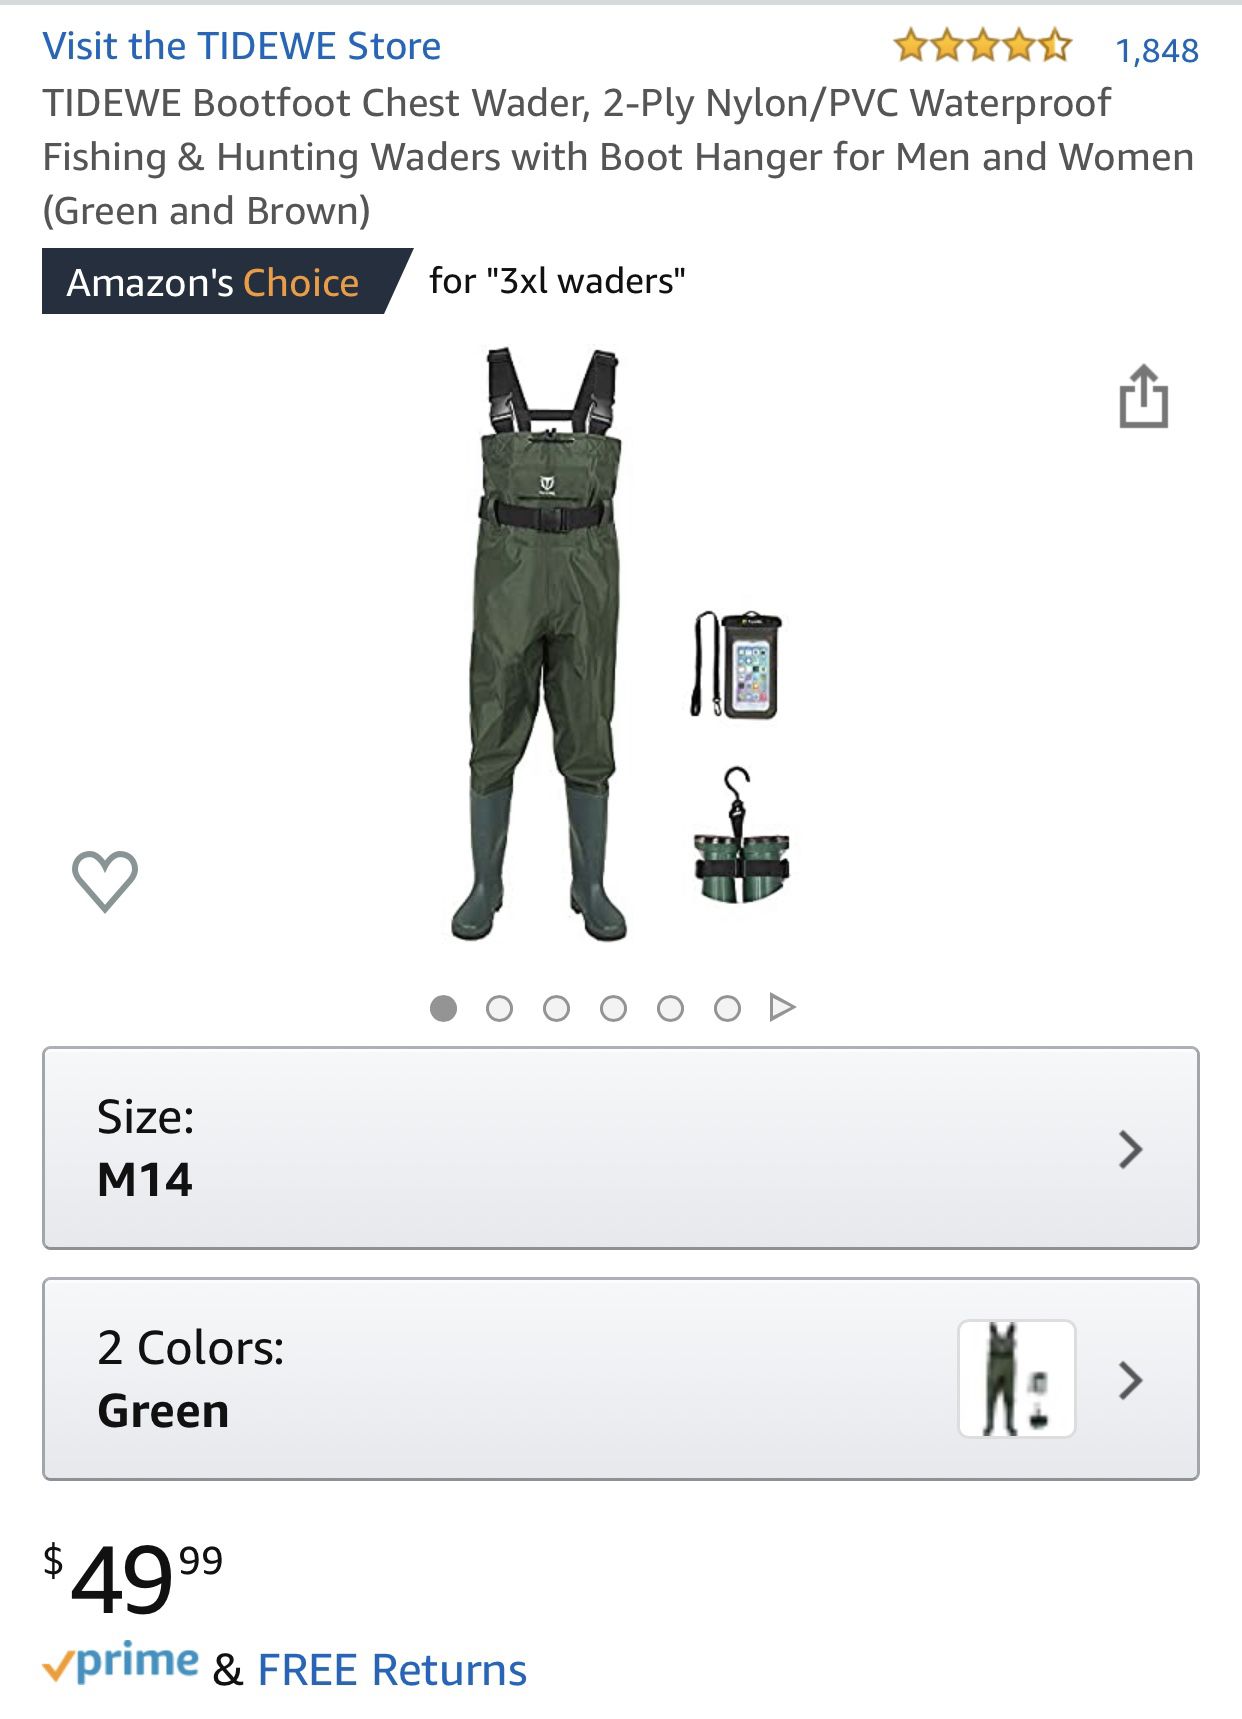 Large Chest Waders for fishing, hunting, boat, water sports